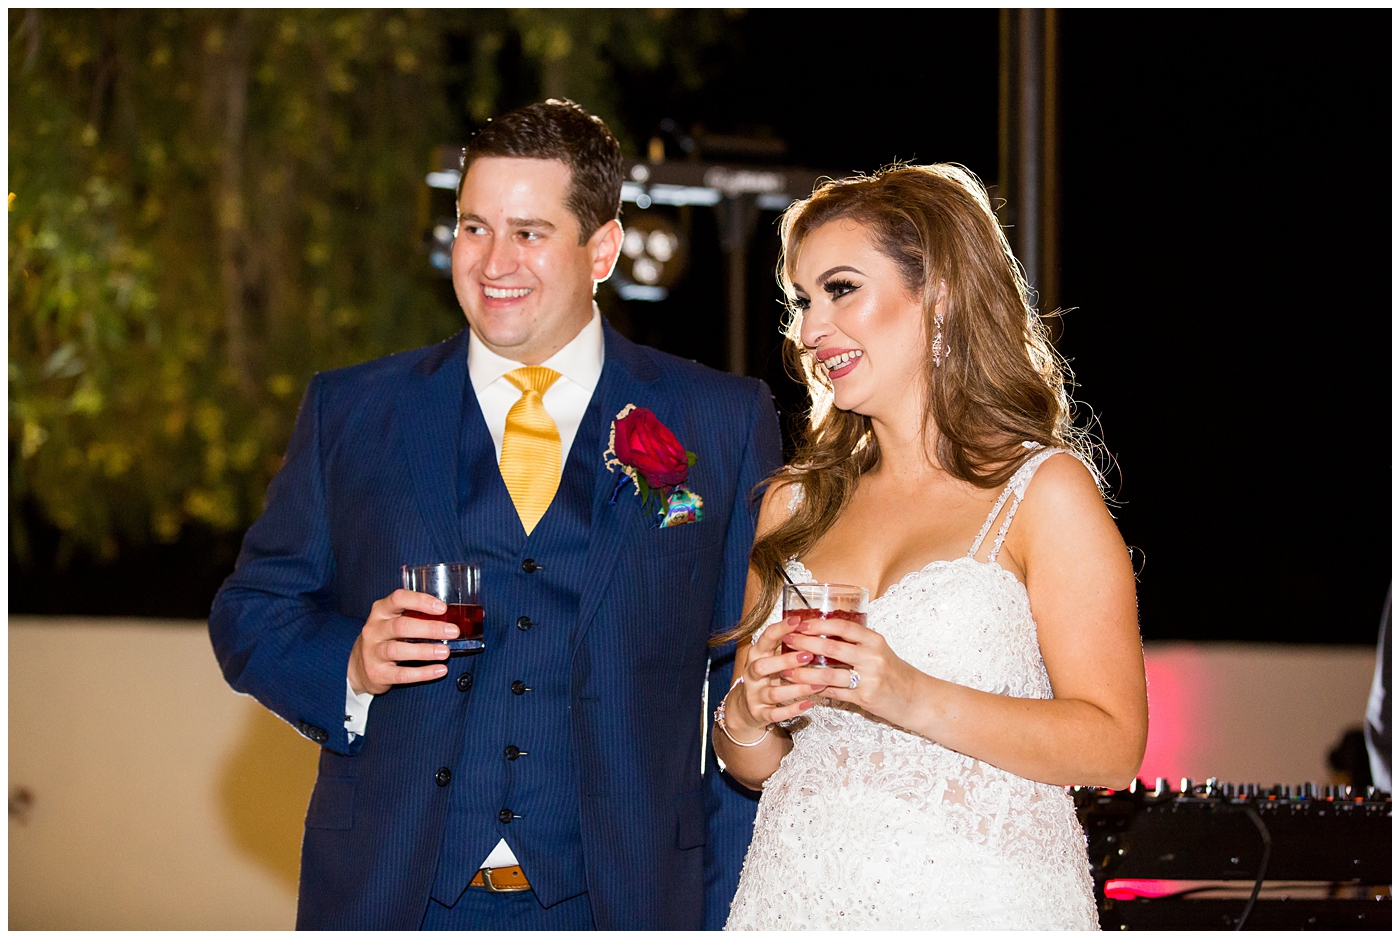 groom in blue suit with yellow tie and red rose boutonniere and bride in morilee wedding dress with red and white rose bouquet during toasts at reception